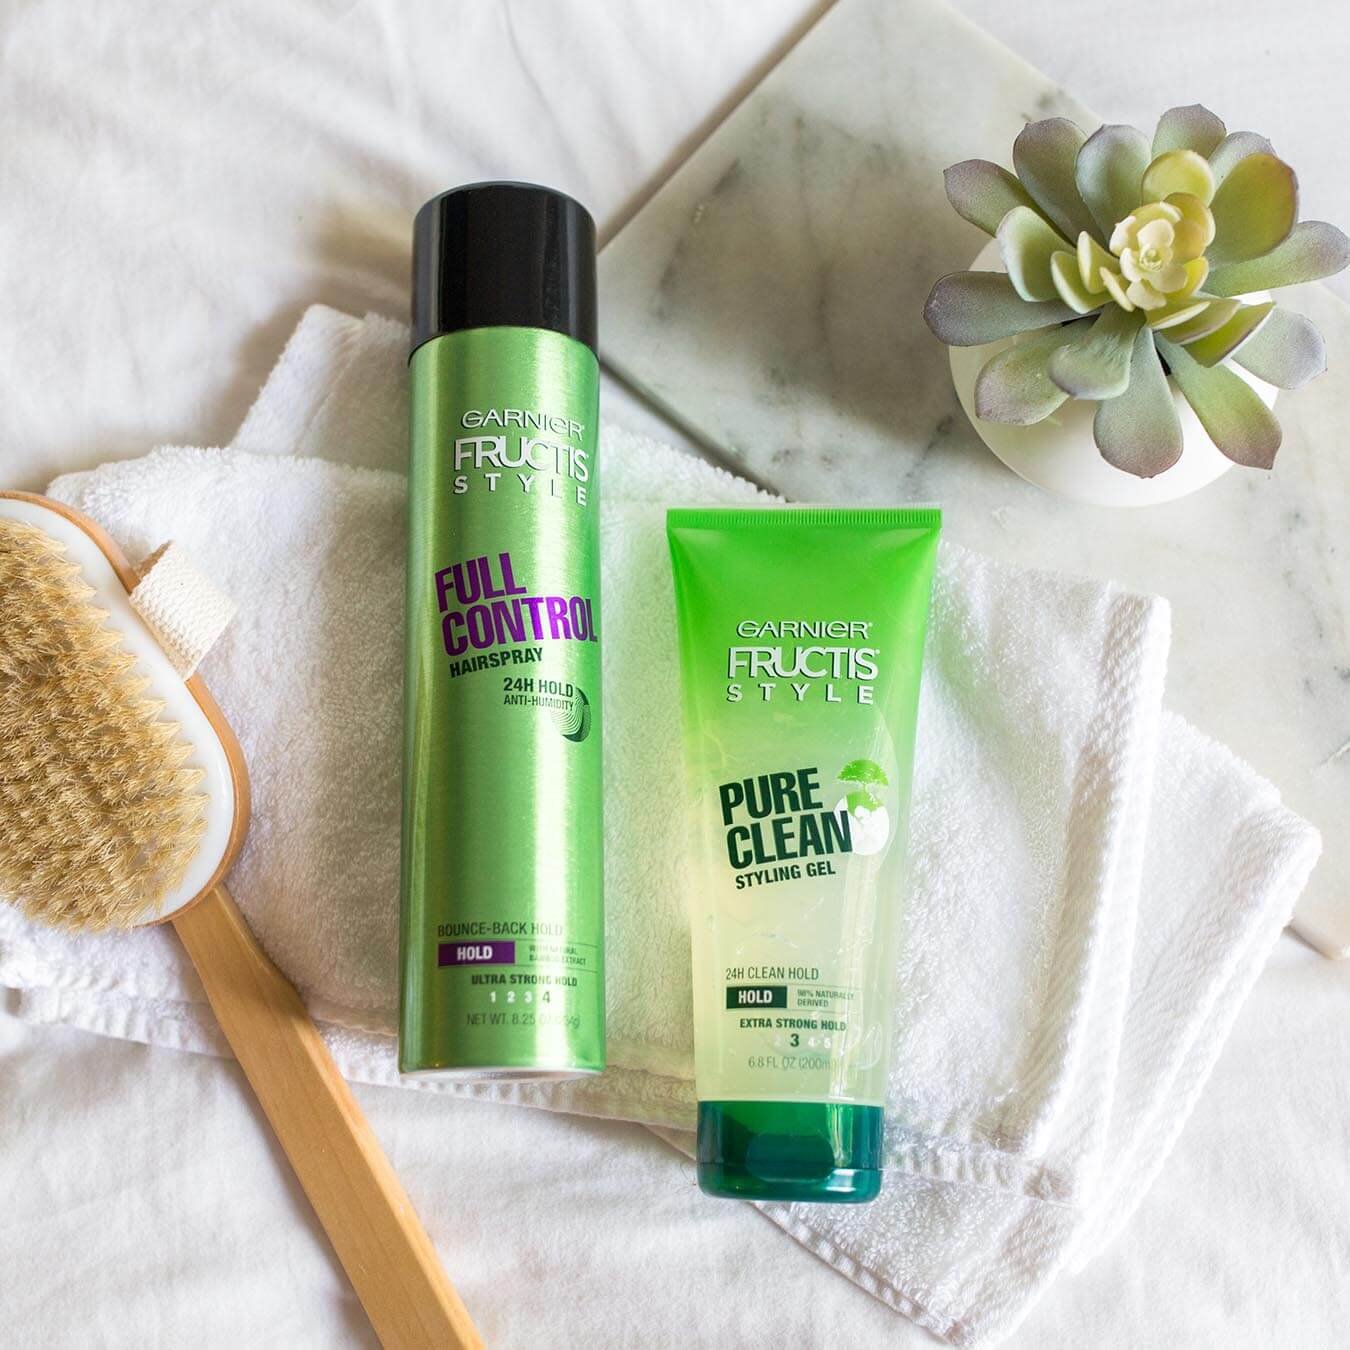 Garnier Fructis Style Full Control Hairspray and Fructis Style Pure Clean Styling Gel on two white wash cloths next to a wooden long-handled scrub brush and a potted succulent.